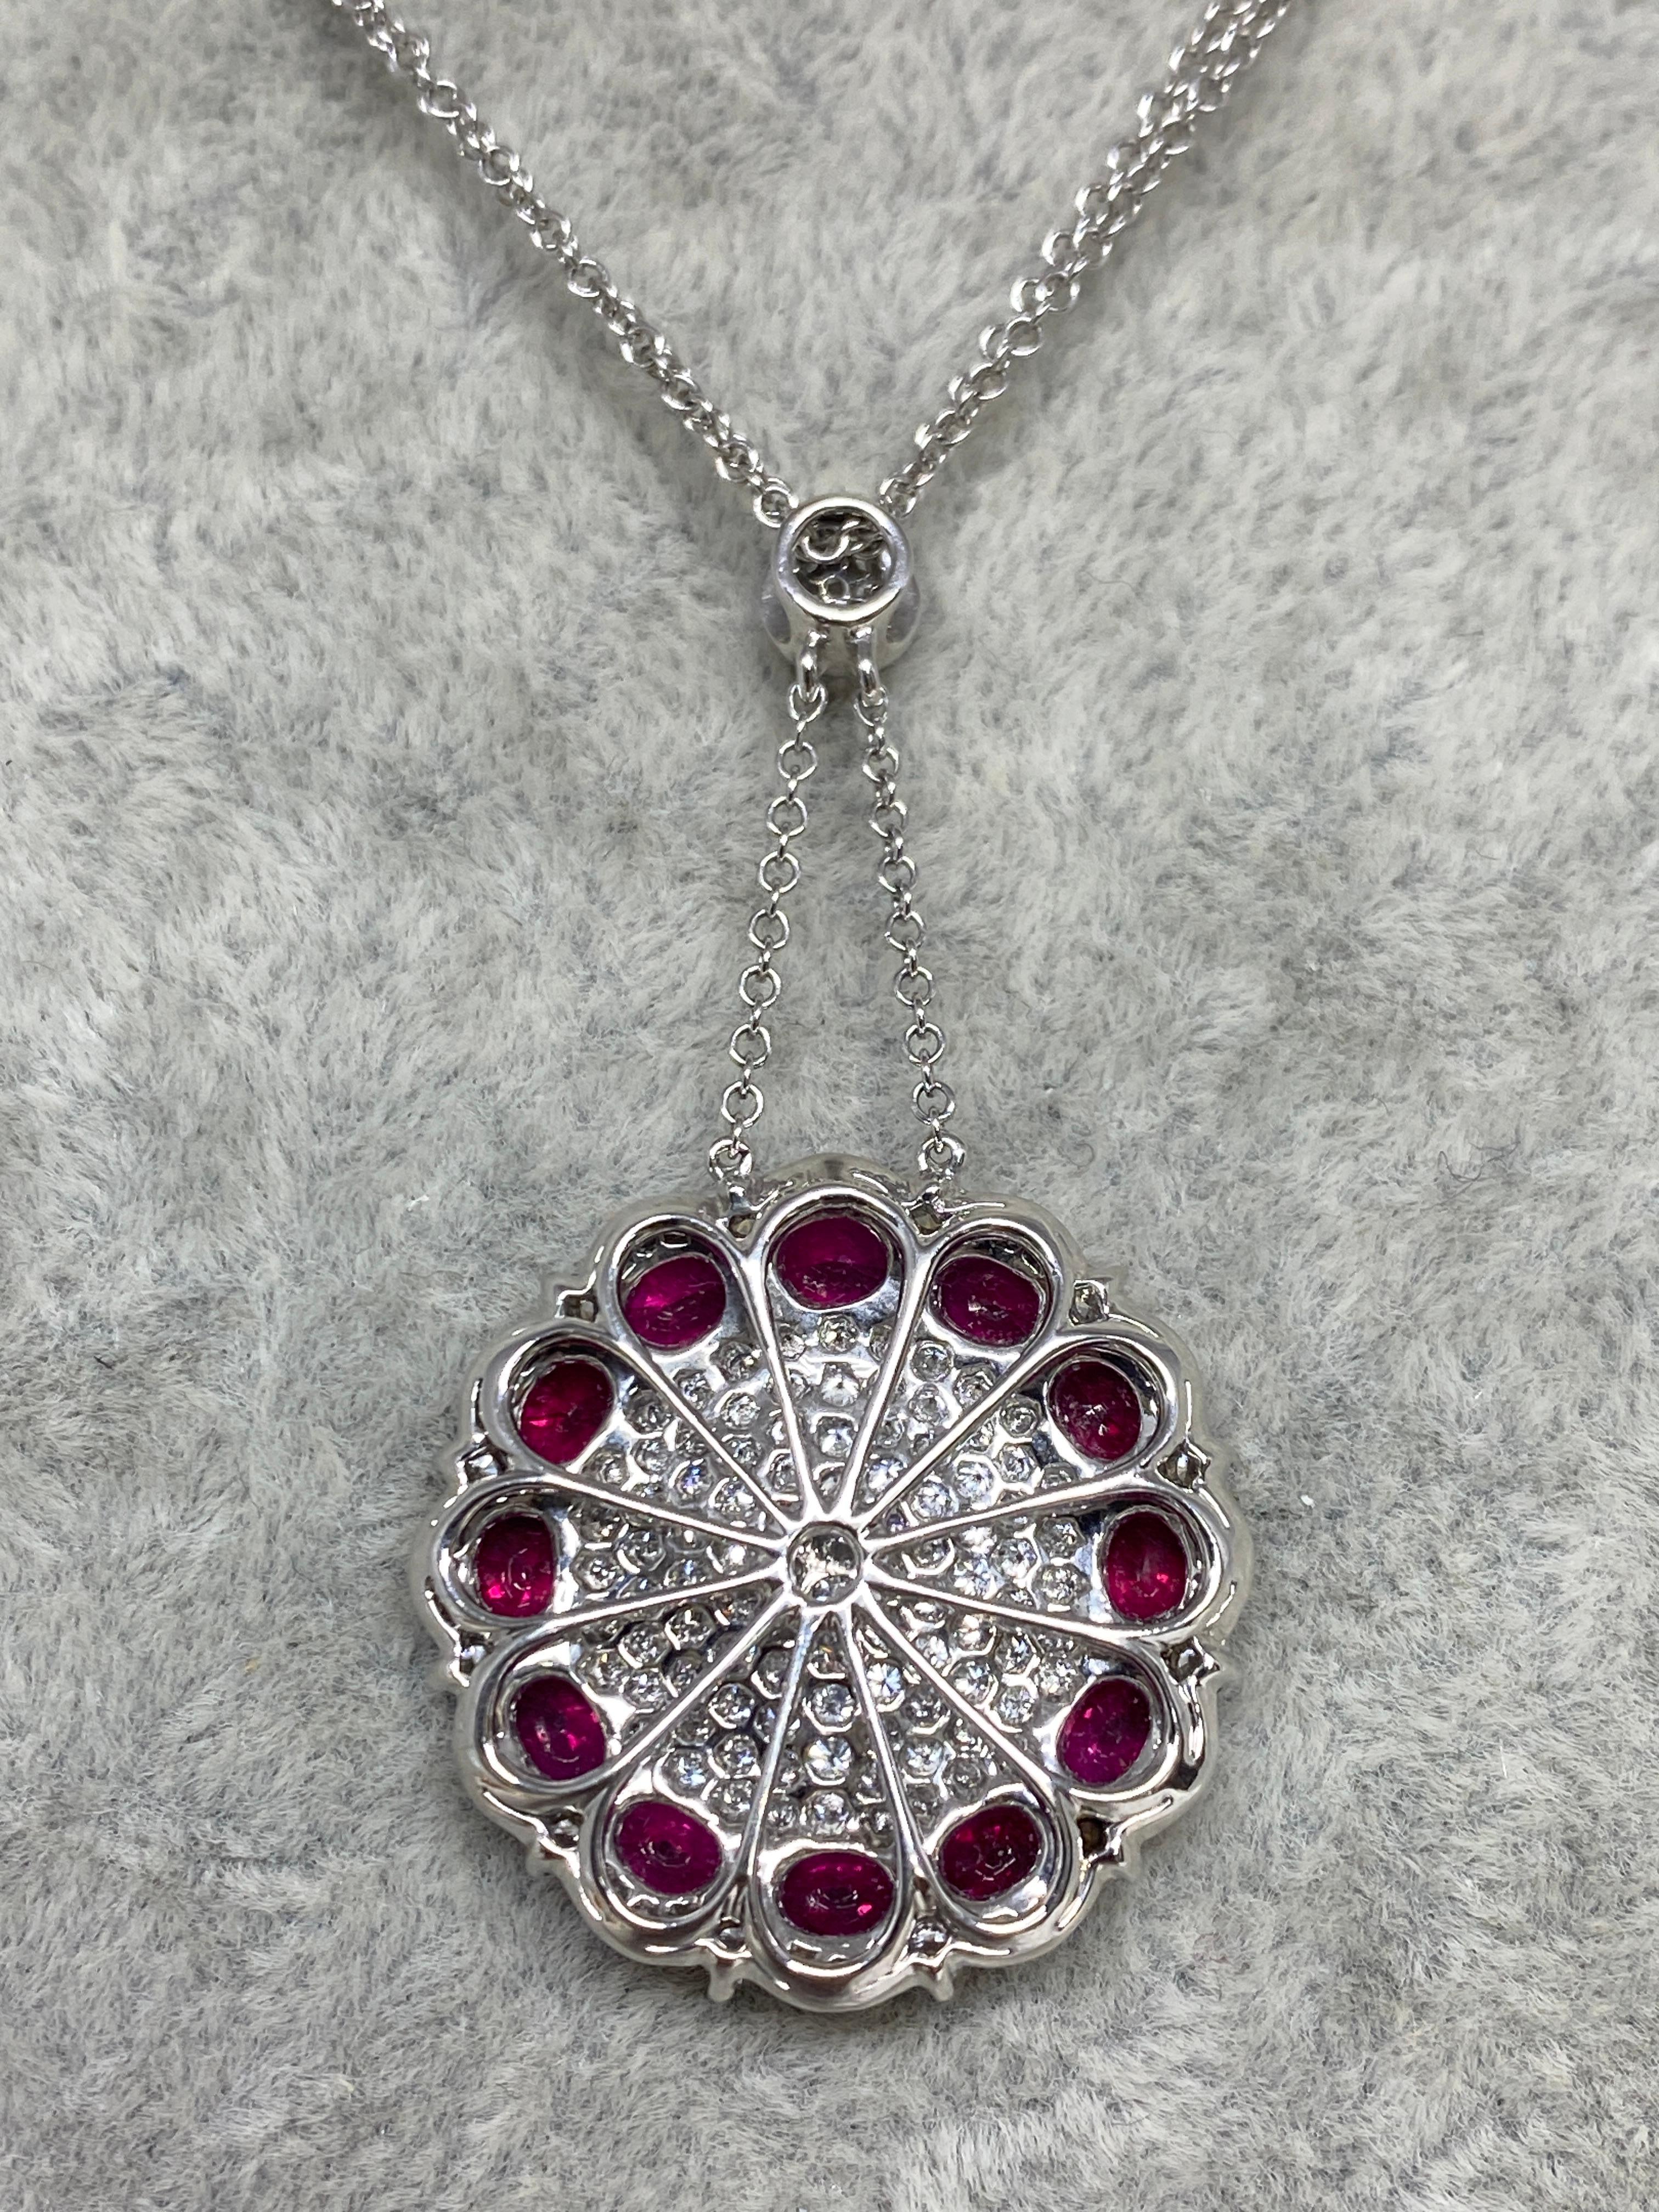 14k White Gold 5.04cttw Natural Ruby & Diamond Round Pendant Necklace  For Sale 4